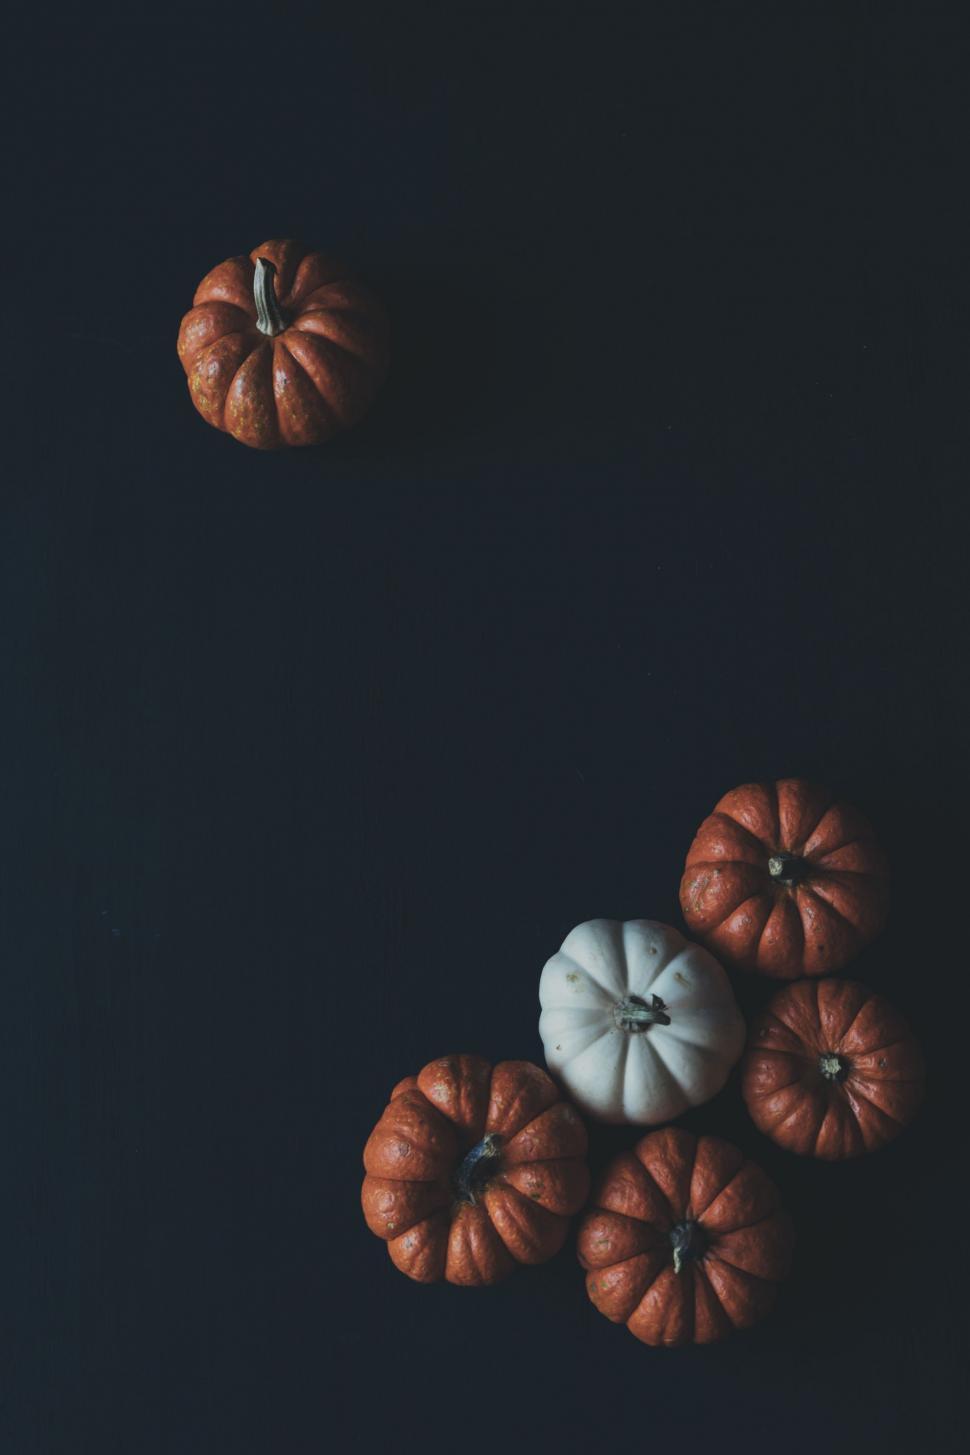 Free Image of Group of Pumpkins on Table 